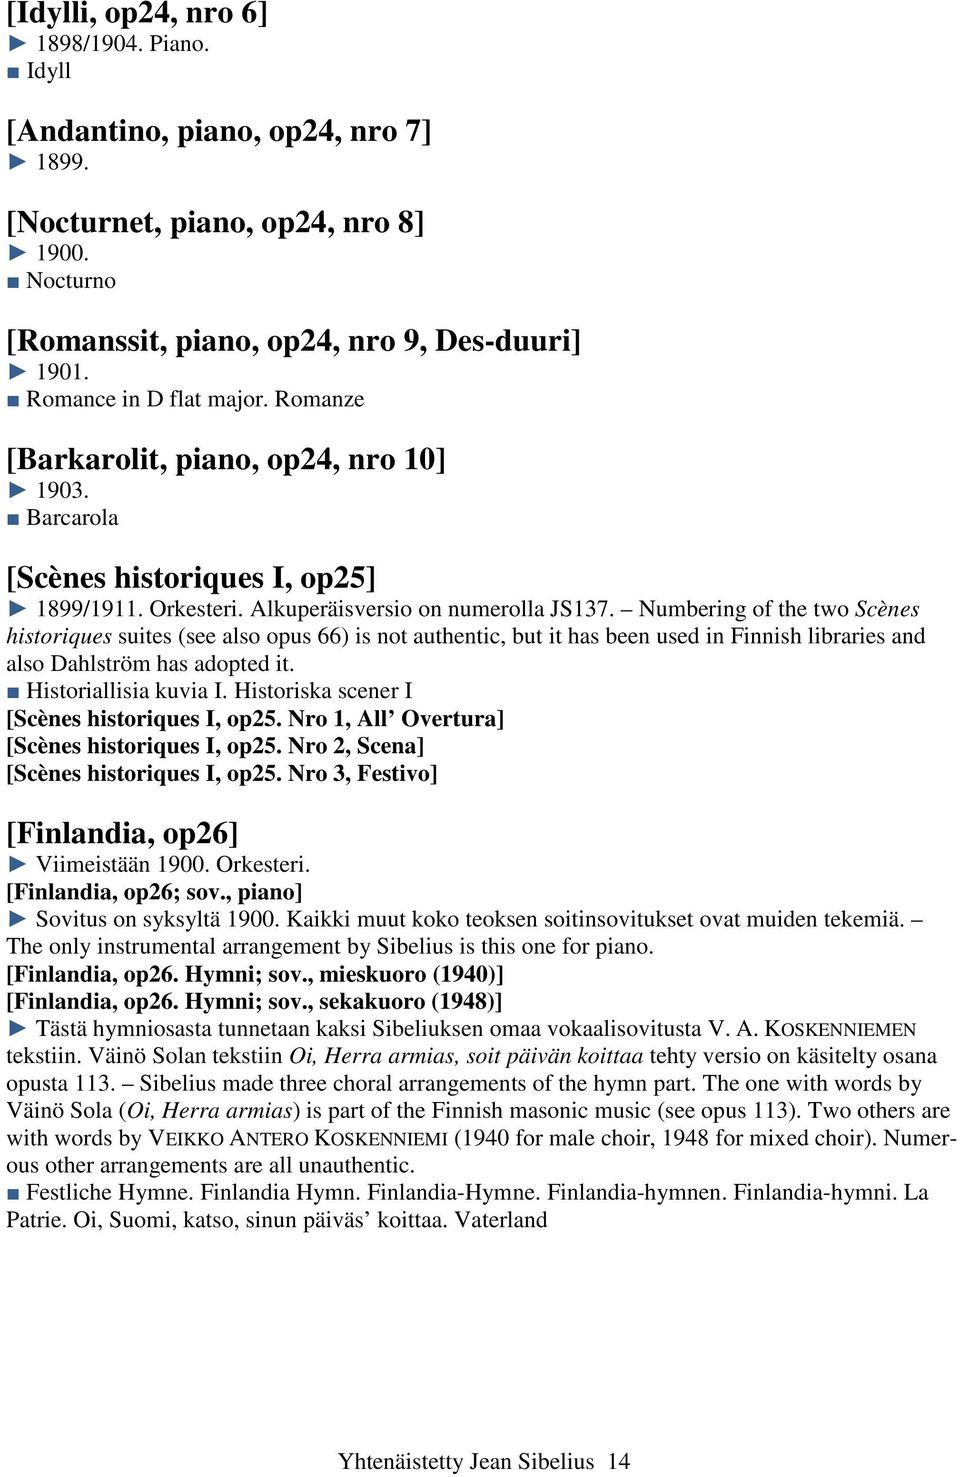 Numbering of the two Scènes historiques suites (see also opus 66) is not authentic, but it has been used in Finnish libraries and also Dahlström has adopted it. Historiallisia kuvia I.